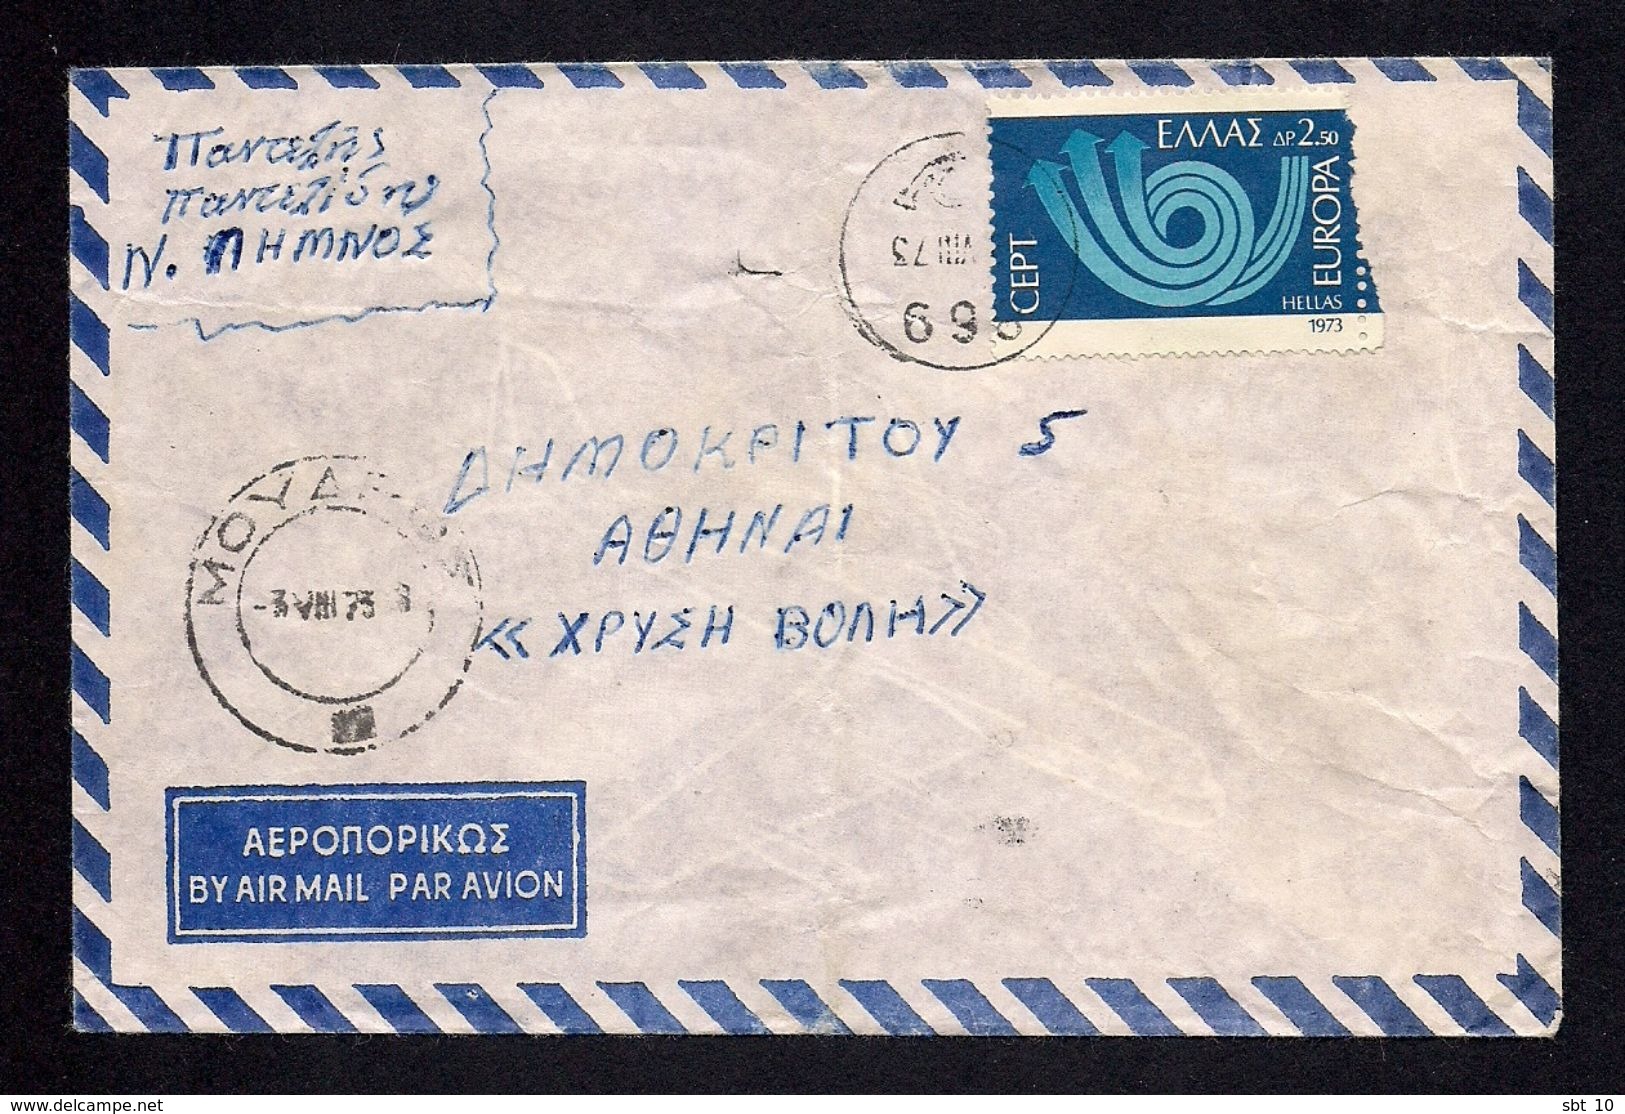 Greece Cover 1973 - Rural Postmark *869* Moudros Lhmnos - Covers & Documents